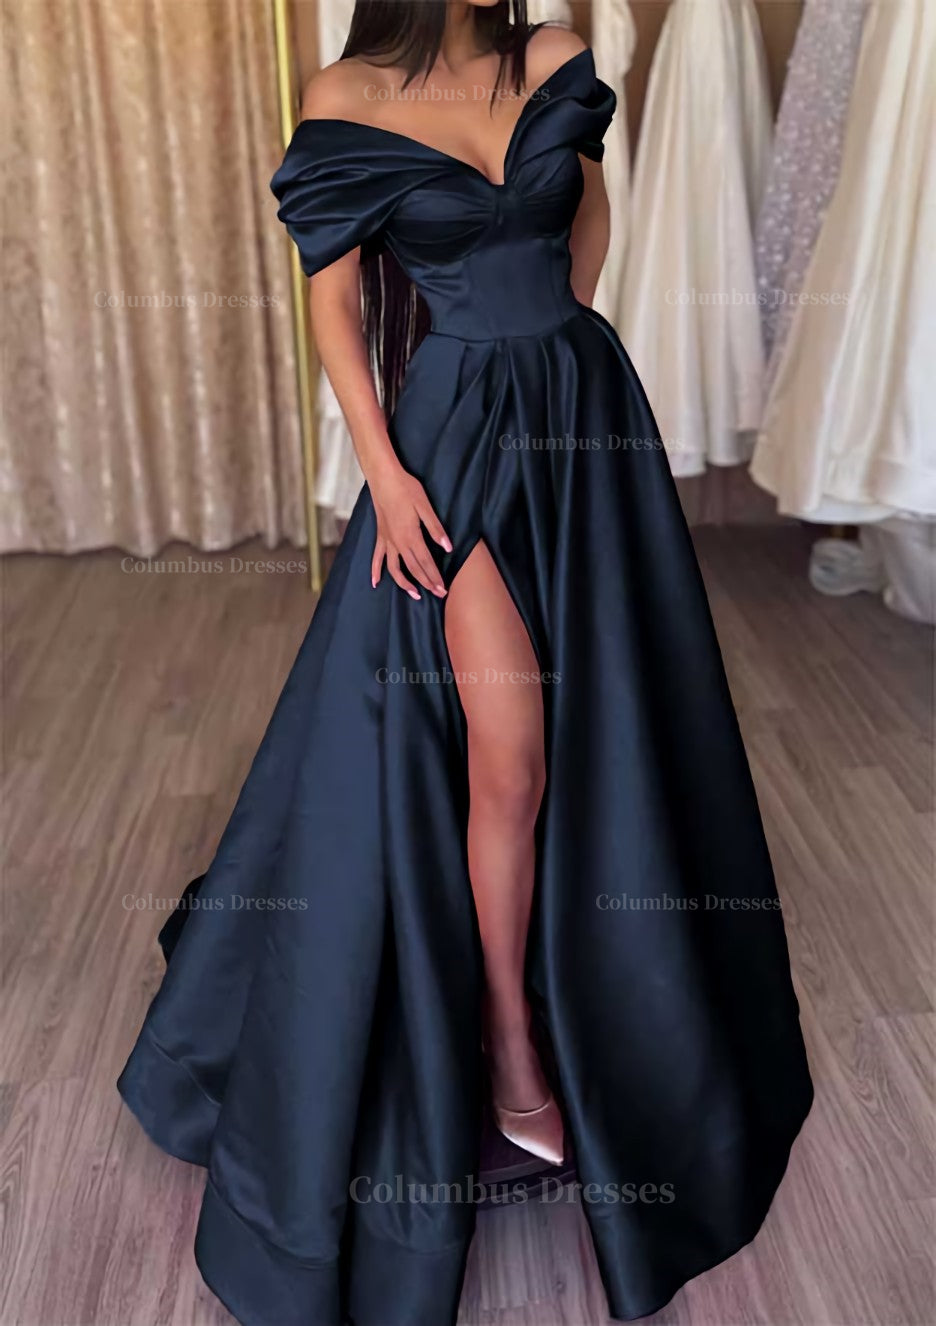 Party Dresses For Teenage Girls, A-line Off-the-Shoulder Short Sleeve Satin Long/Floor-Length Prom Dress With Ruffles Split